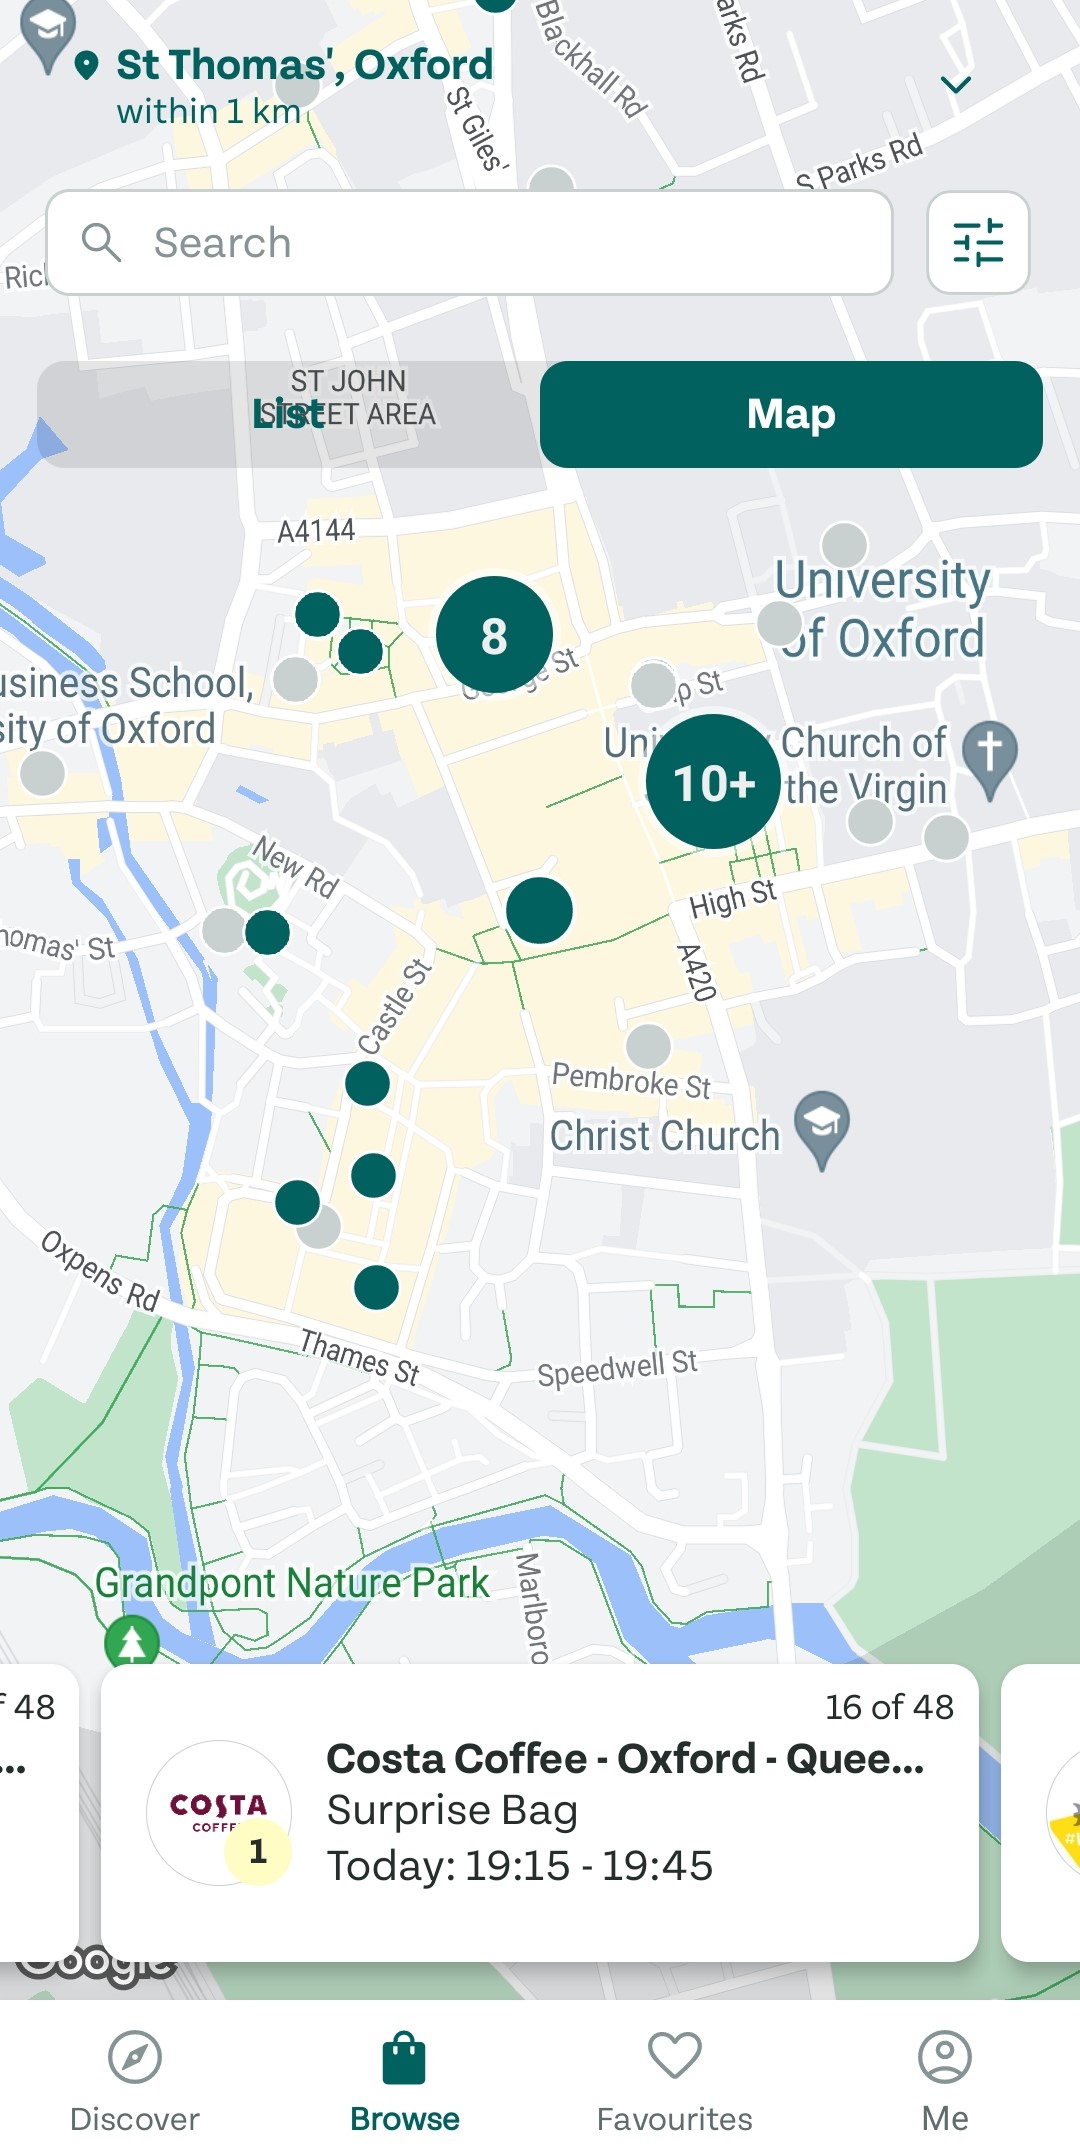 A map showing the locations of oxford city centre.